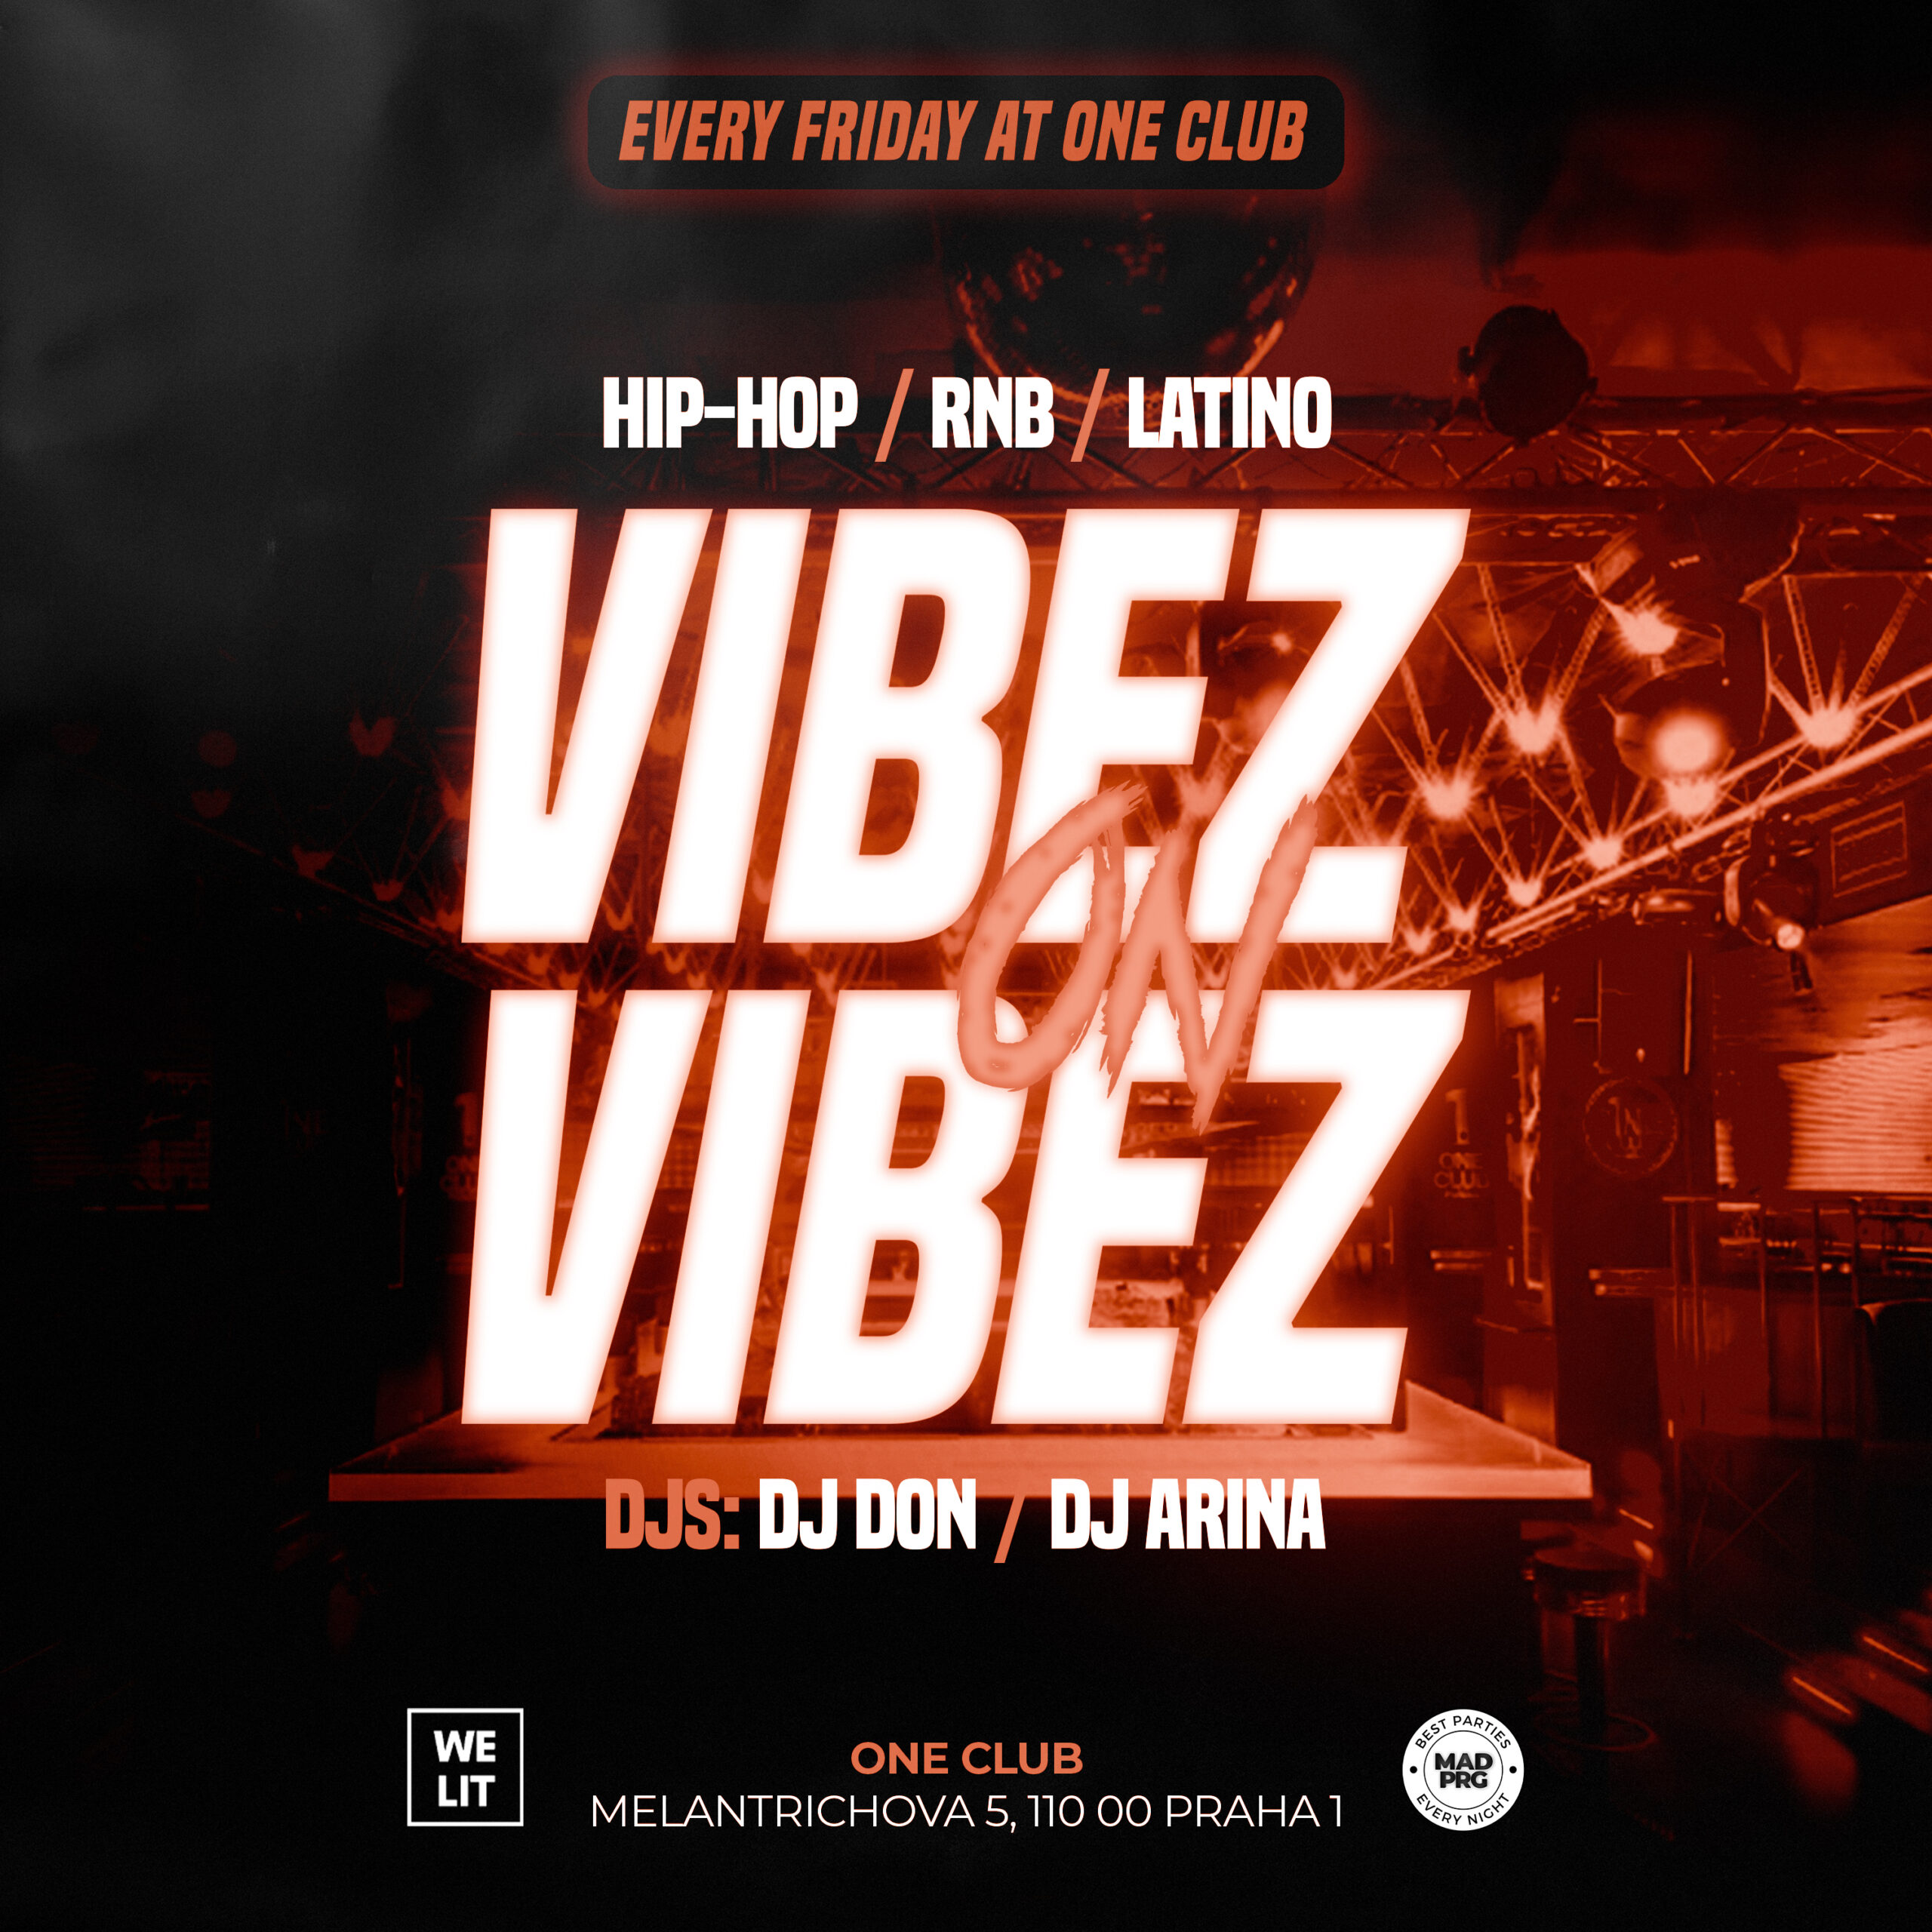 VIbez on Vibez at ONe Club. The friday party you don't want to miss!